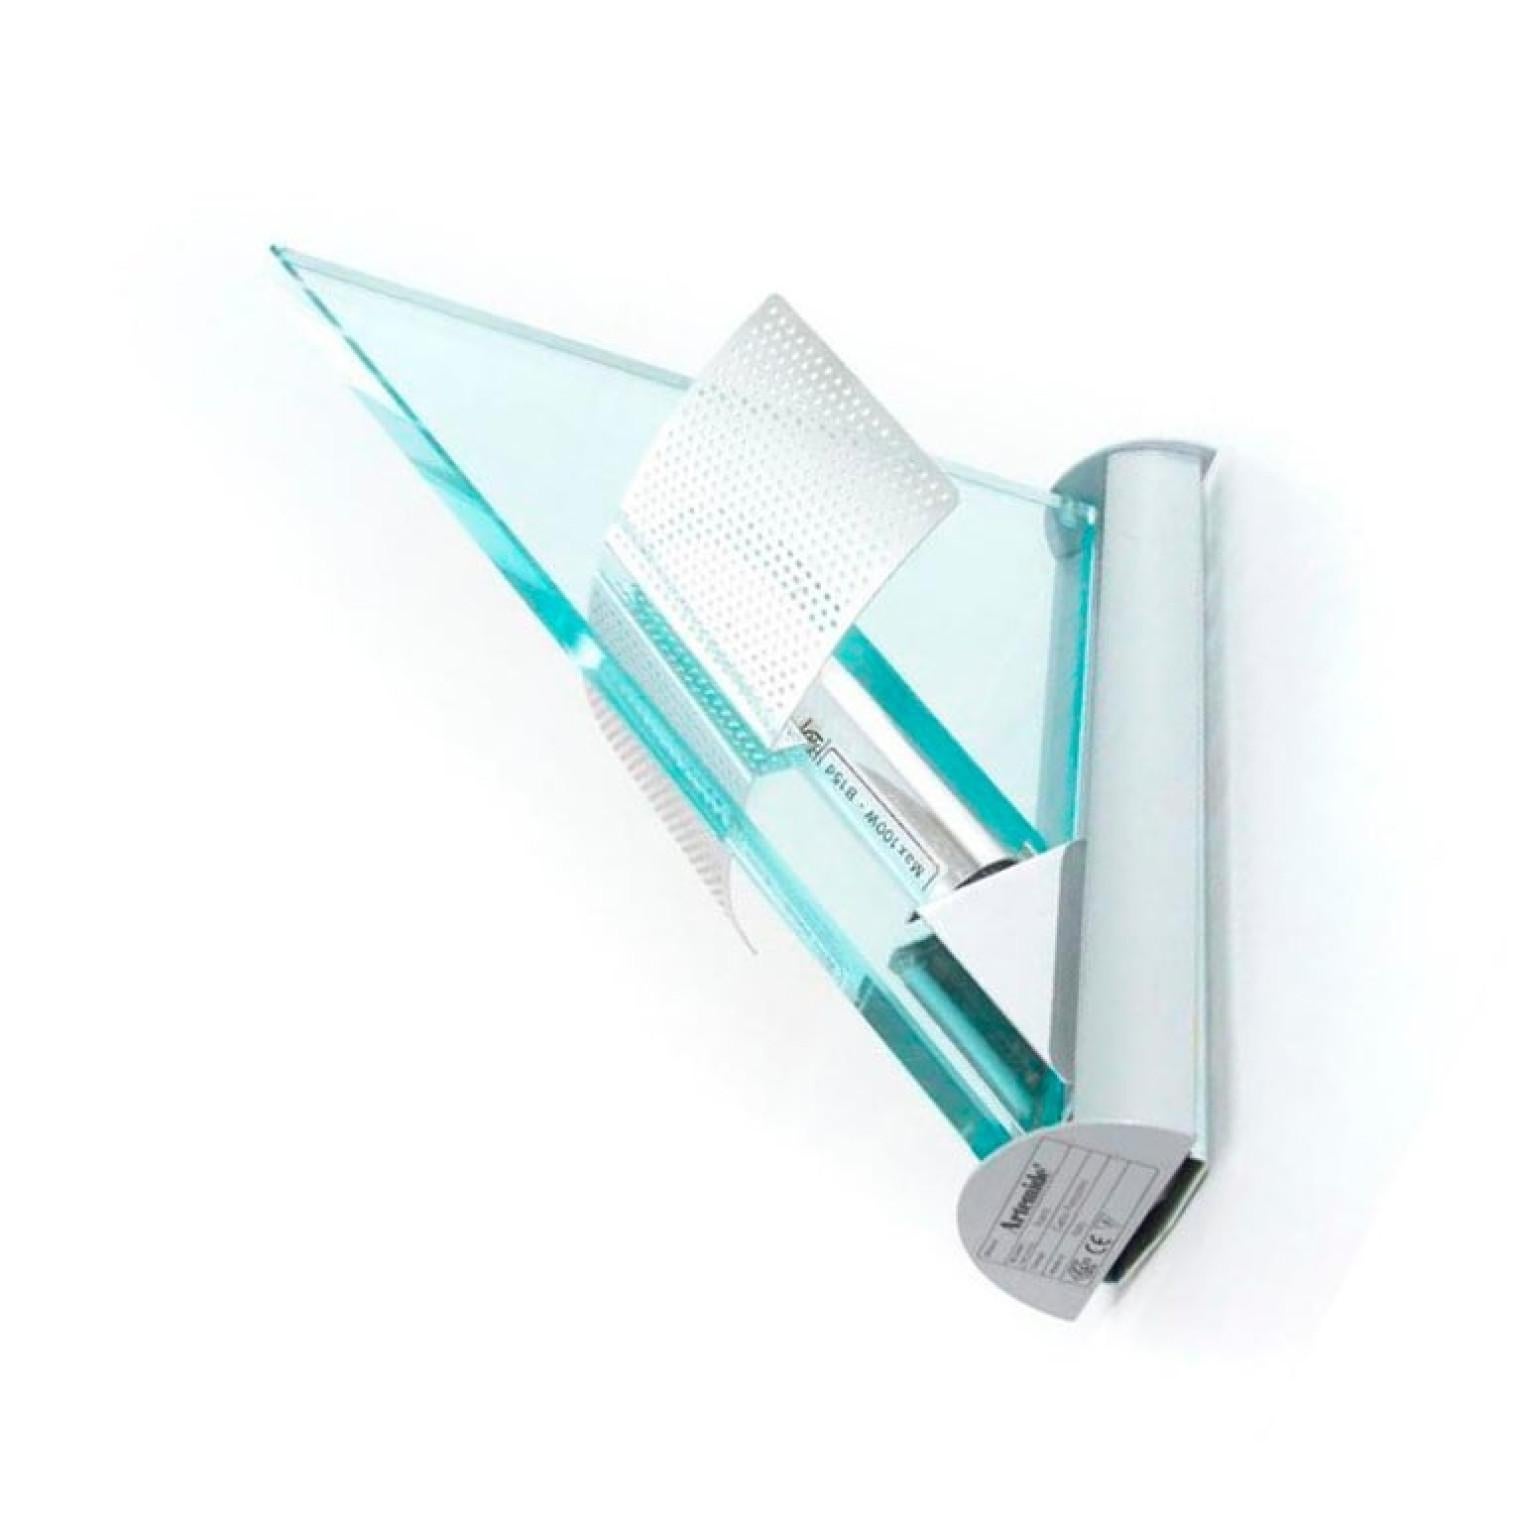 One of the Ten Glass Aluminium Triangle Shaped Wall Lights, Artemide, 1984 For Sale 2